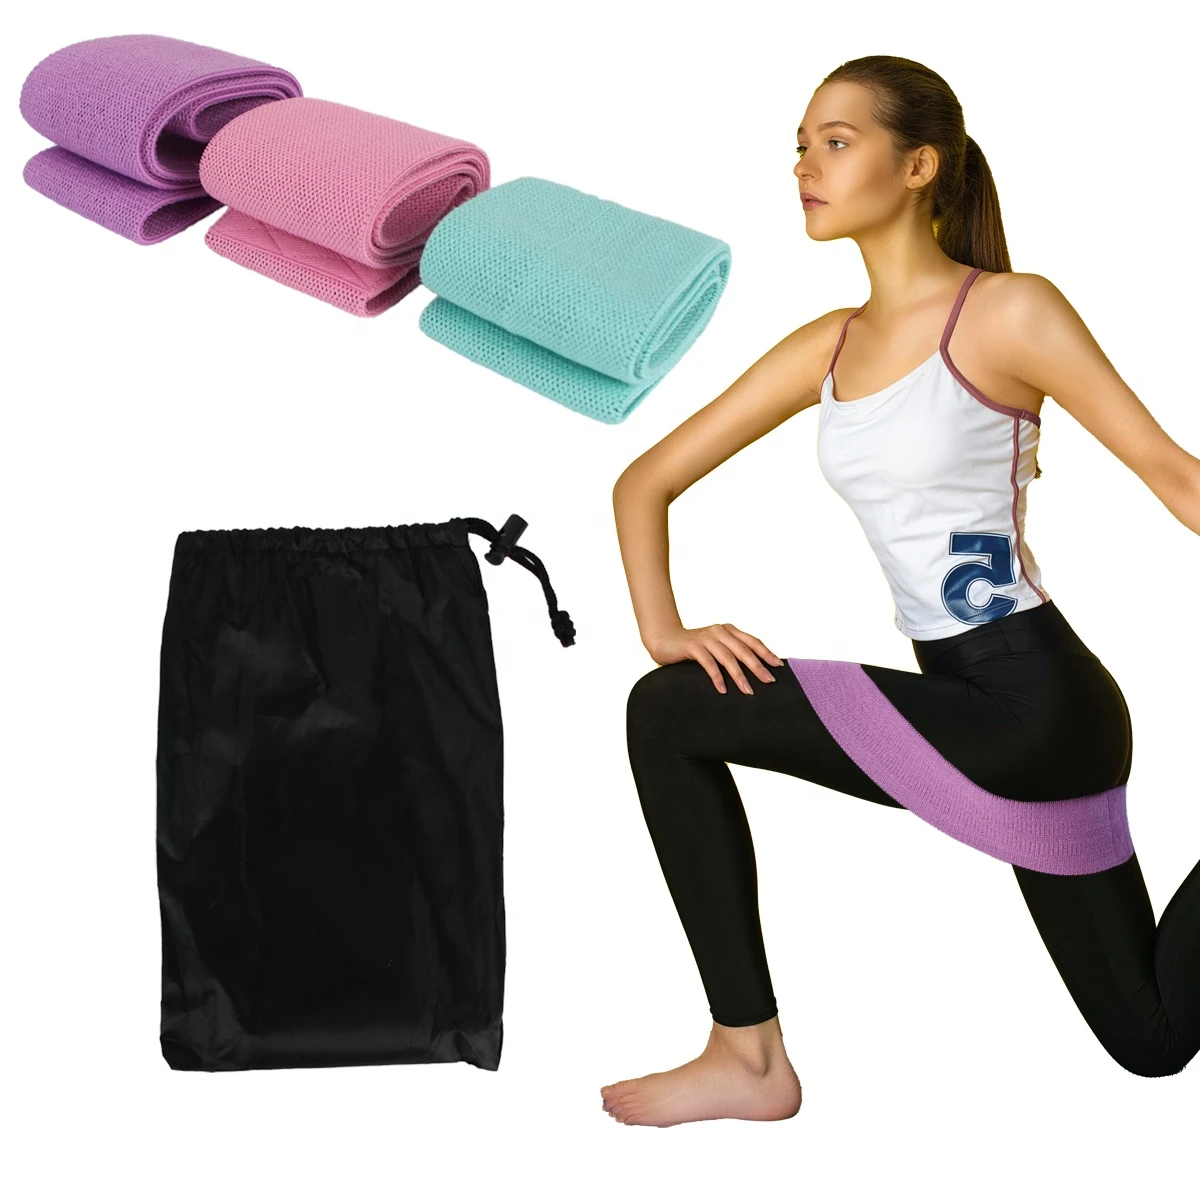 Fitness Exercise Elastic Latex Fabric Loop Hip Resistance Band